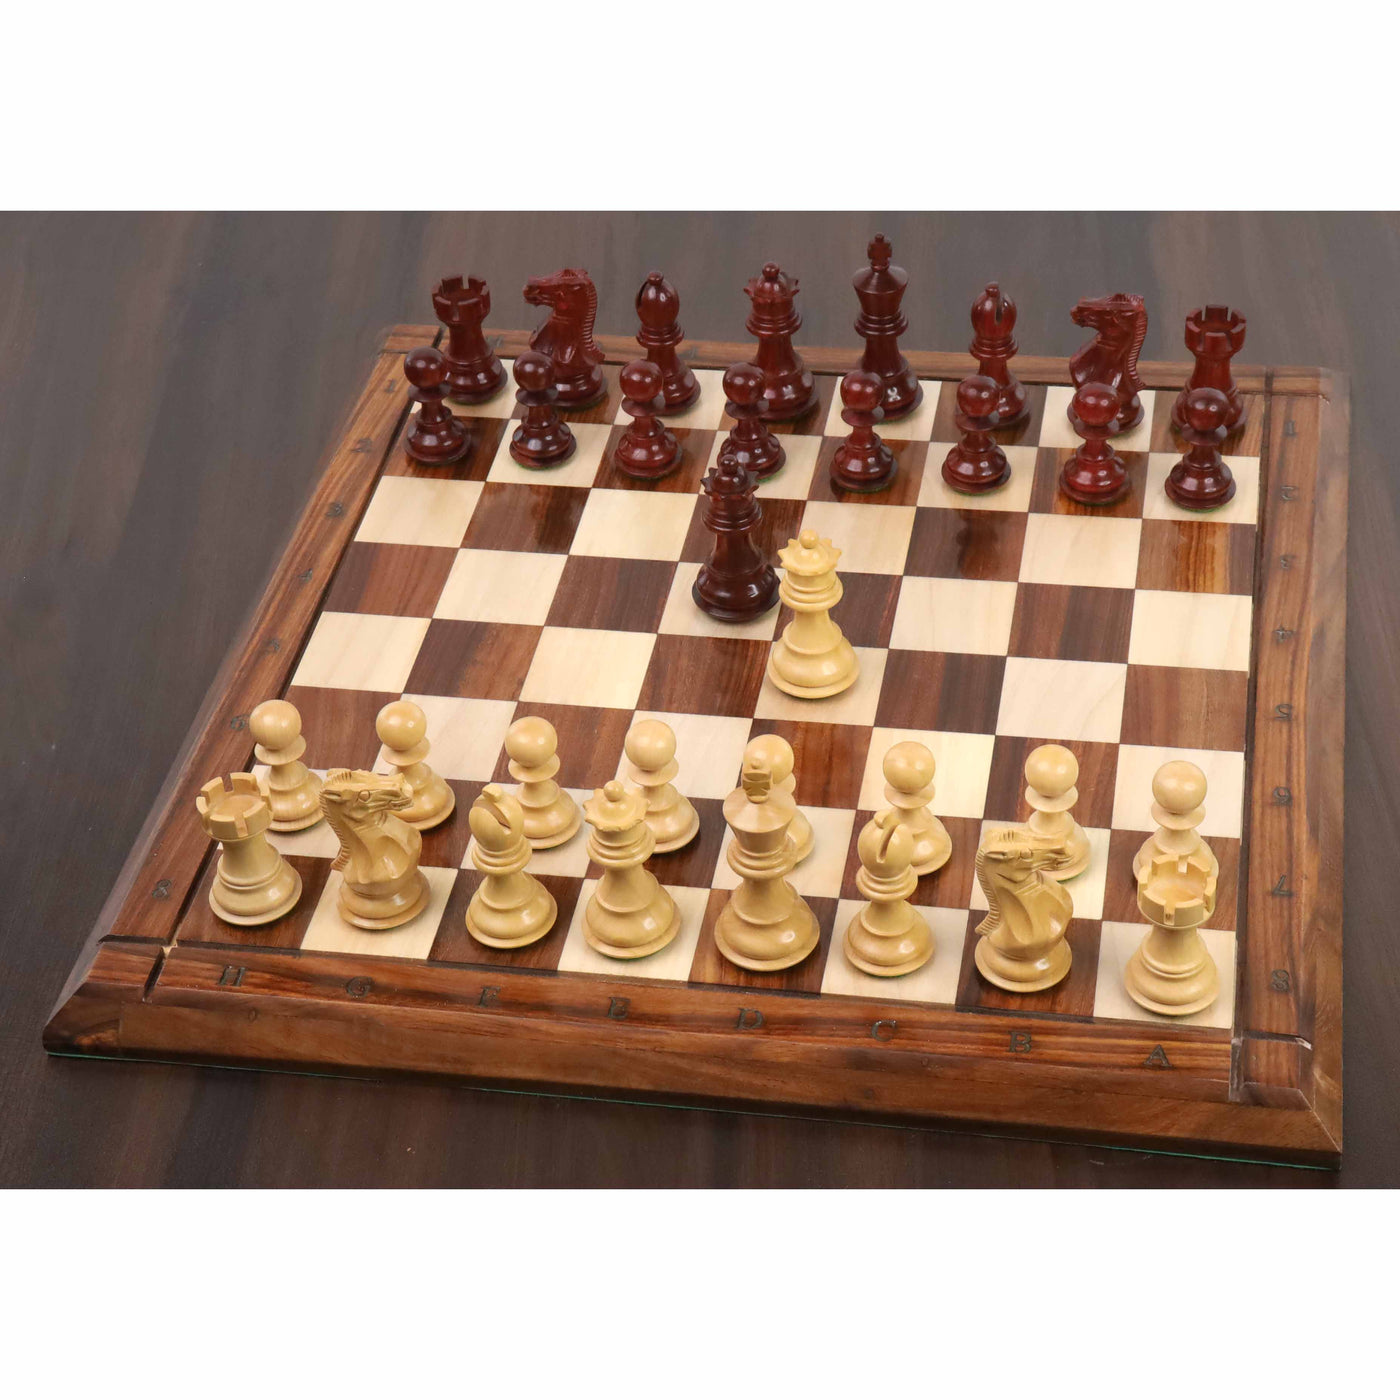 3.1" Pro Staunton Luxury Chess Pieces Only set - Triple Weighted Bud Rose Wood